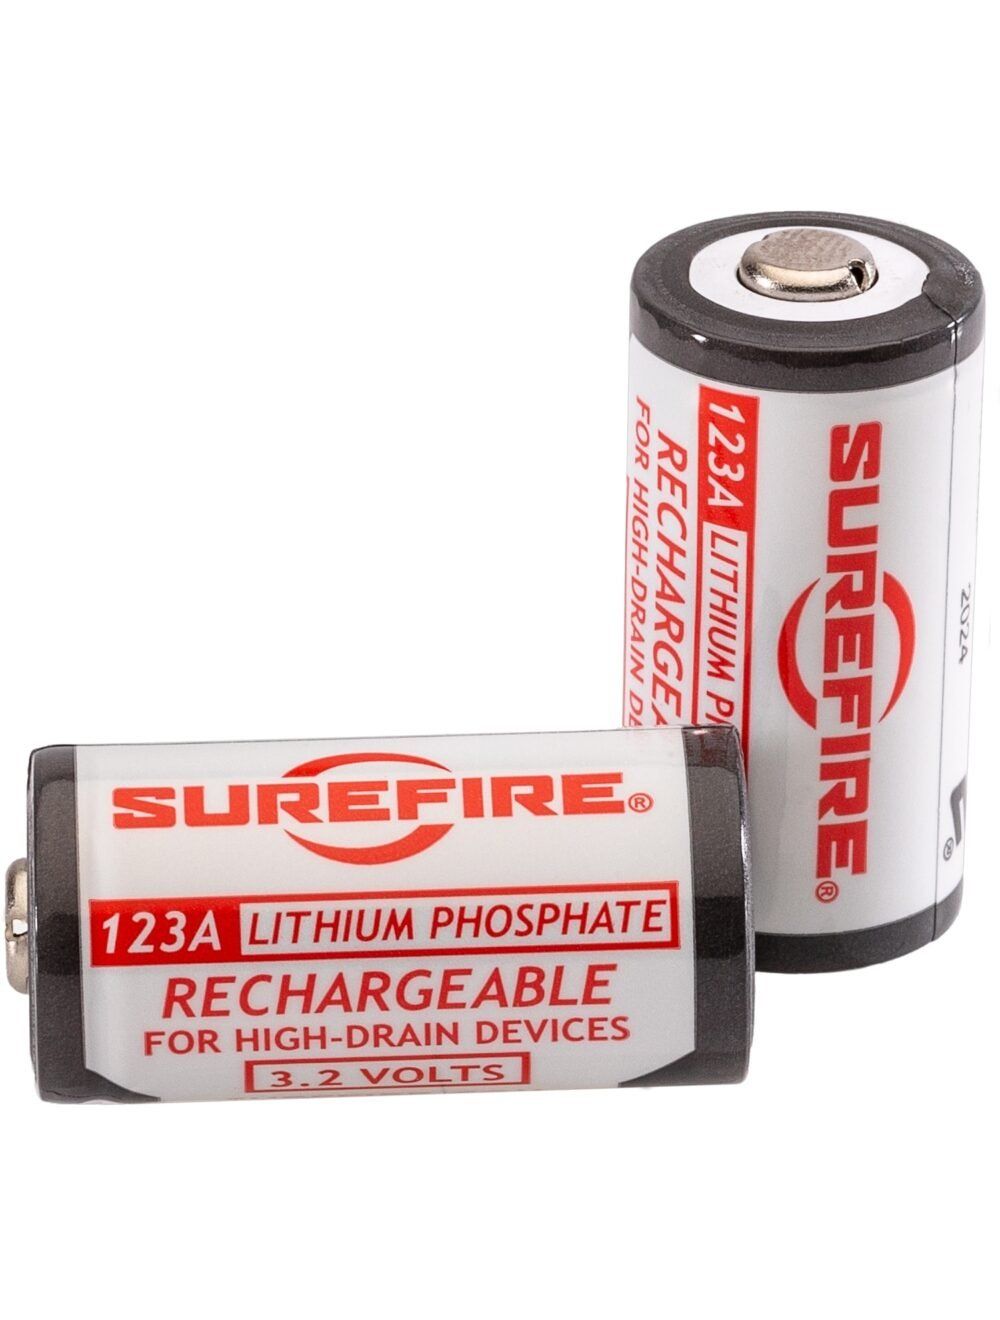 123A Rechargeable Batteries